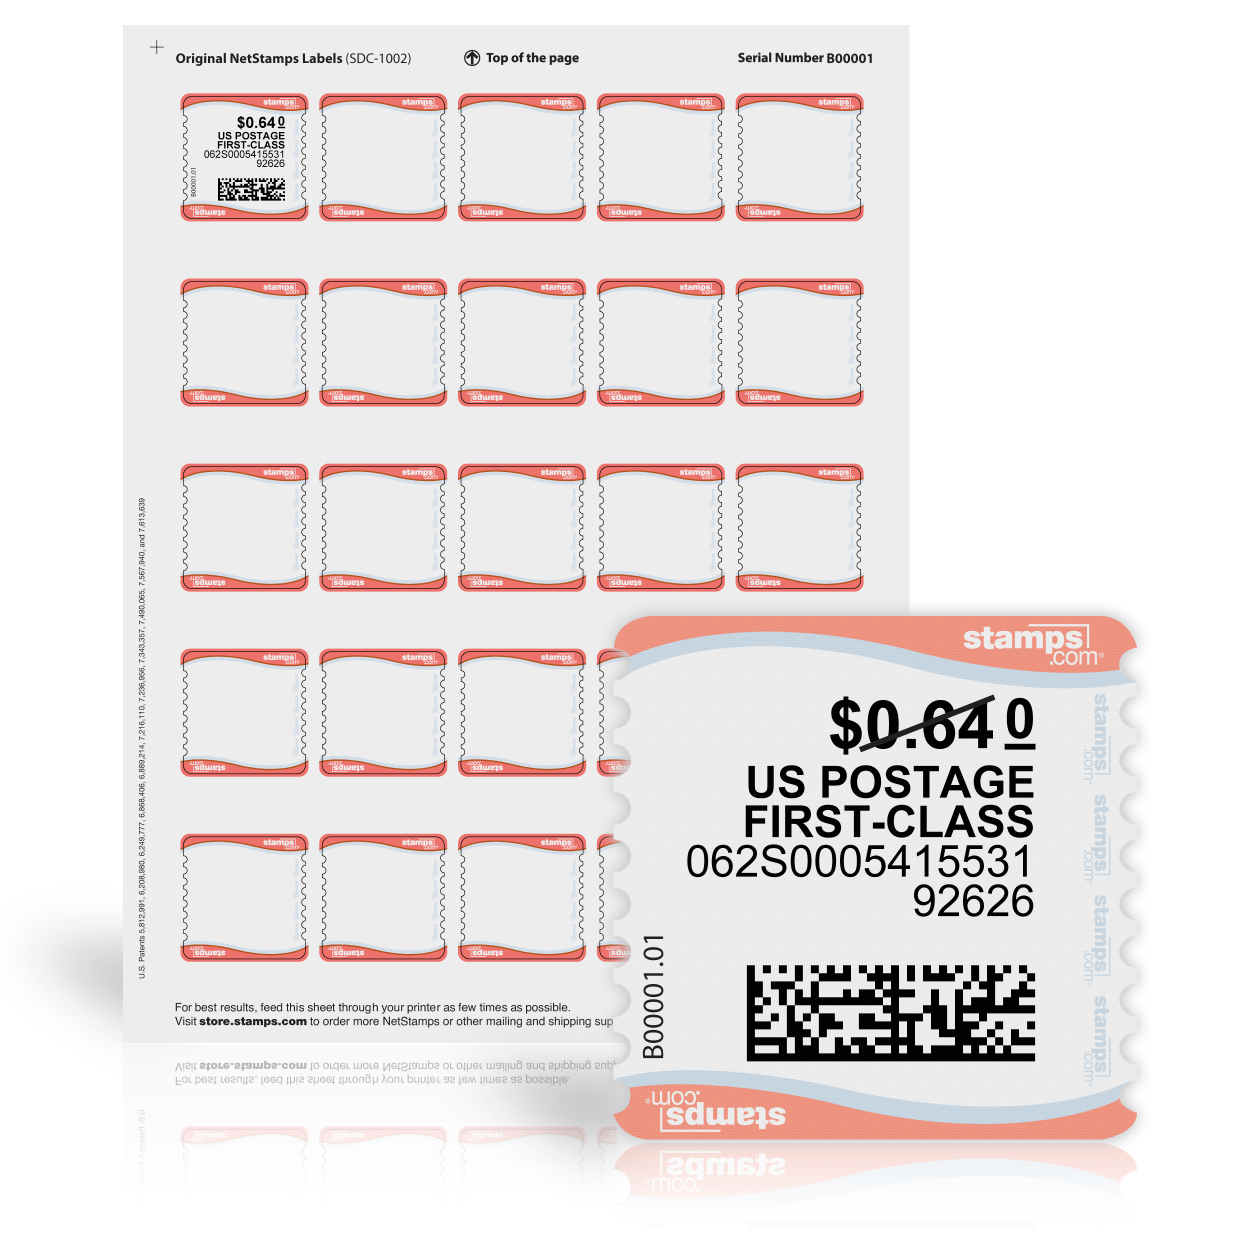 Envelope Moistener with Adhesive, Fast-Drying, Envelope Sealer, Stamp and Letter Glue Licker, Ideal for Envelopes, Stamps, Letters - 4 Pack (13454)